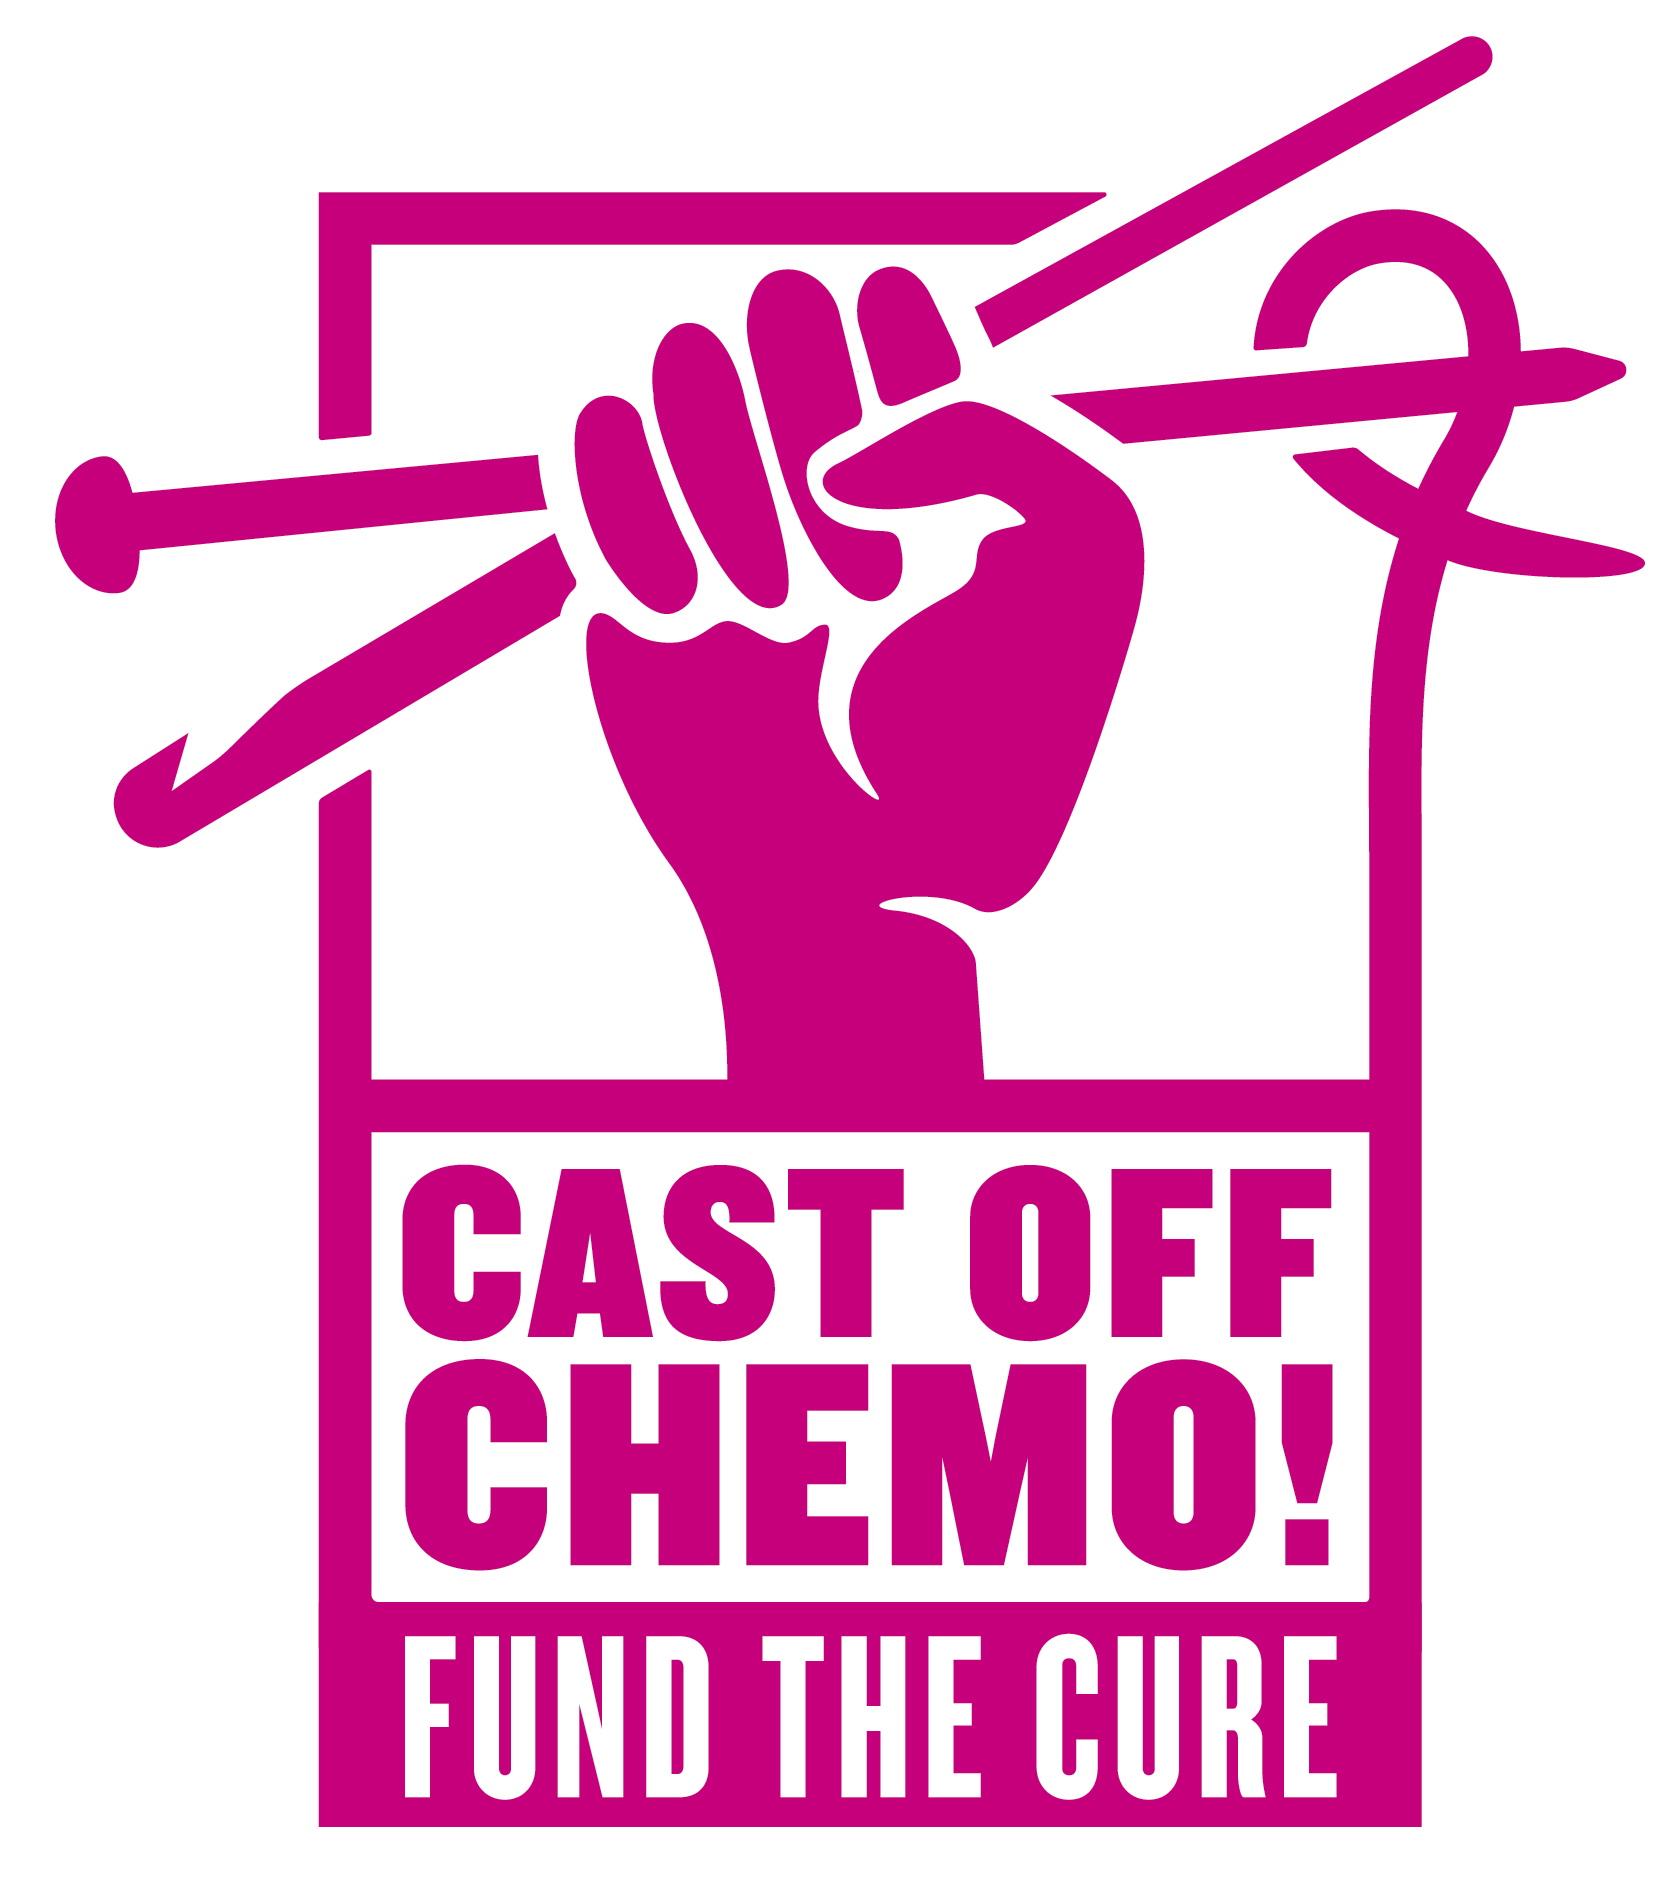 Chemo Logo - Cast Off Chemo!. Supporting cancer treatment clinical trials